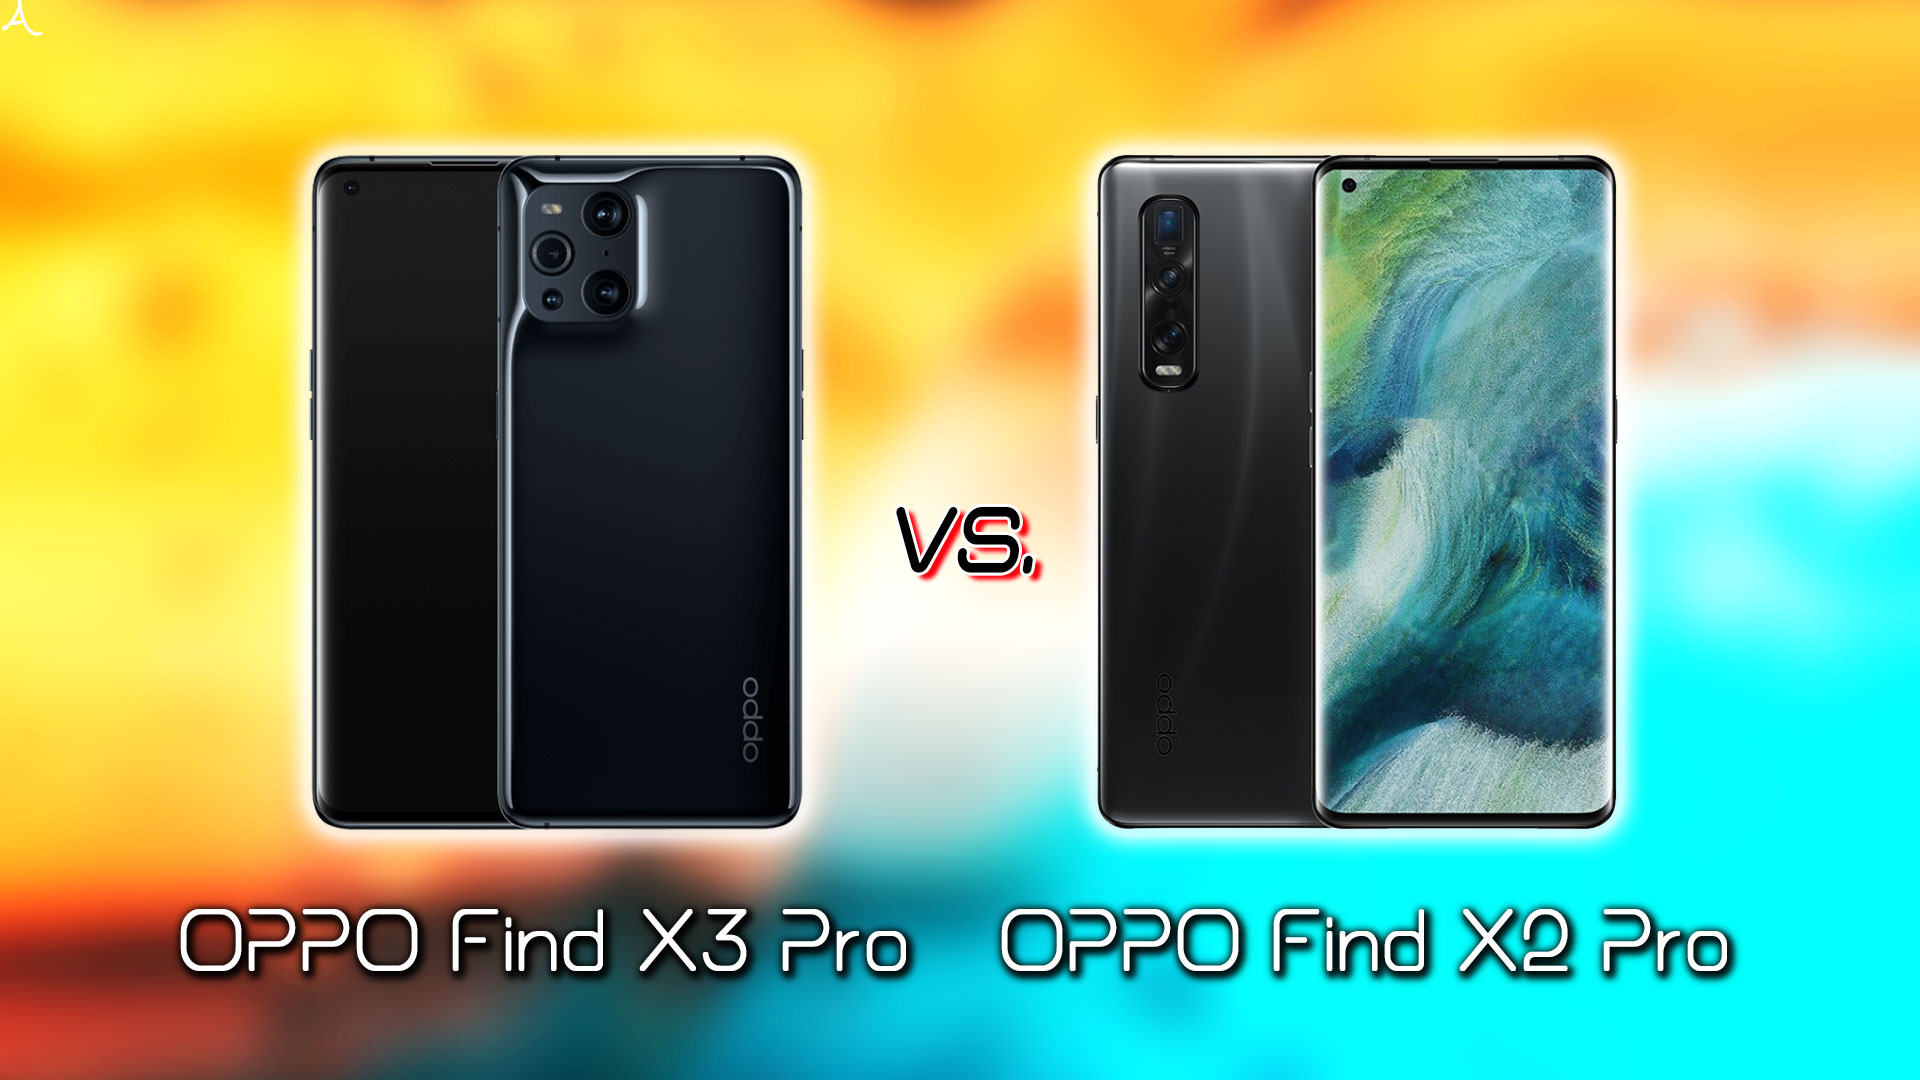 ｢OPPO Find X3 Pro｣と｢OPPO Find X2 Pro｣の違いを比較：どっちを買う？